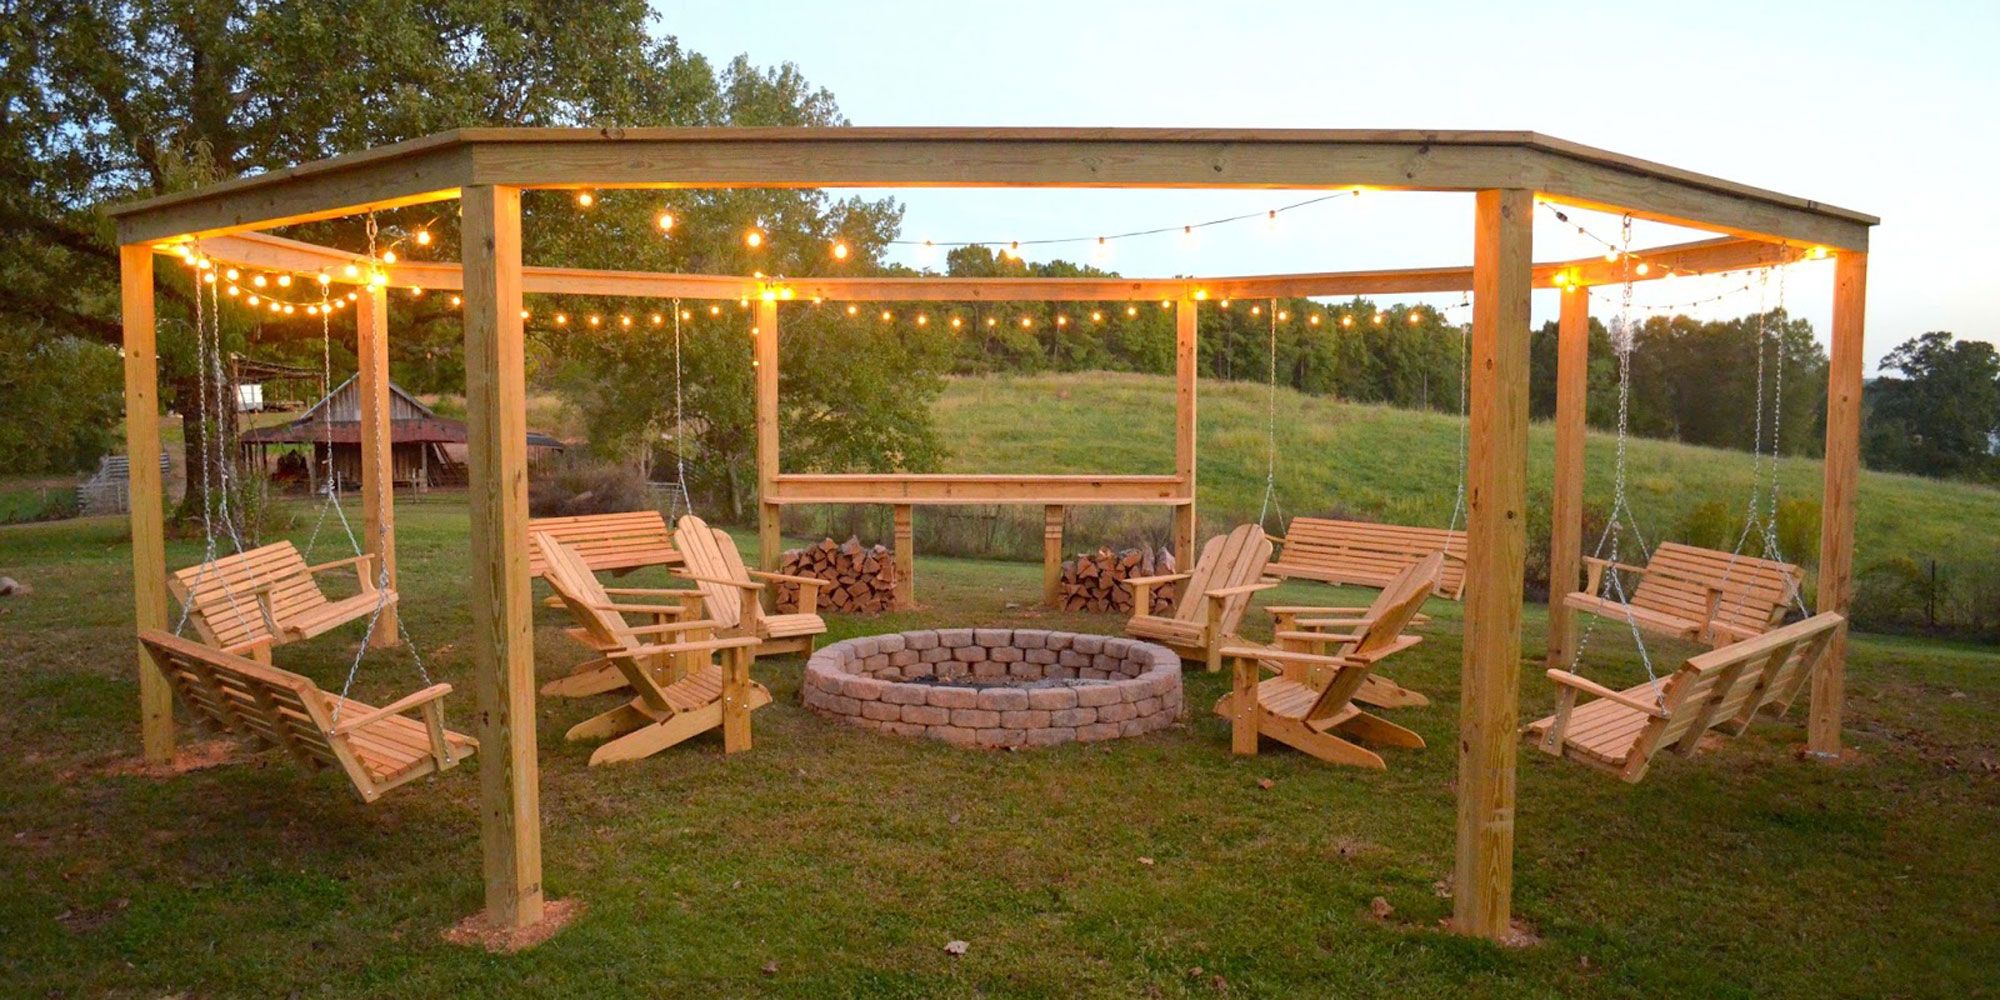 This Diy Backyard Pergola Is The, Fire Pit Set Up